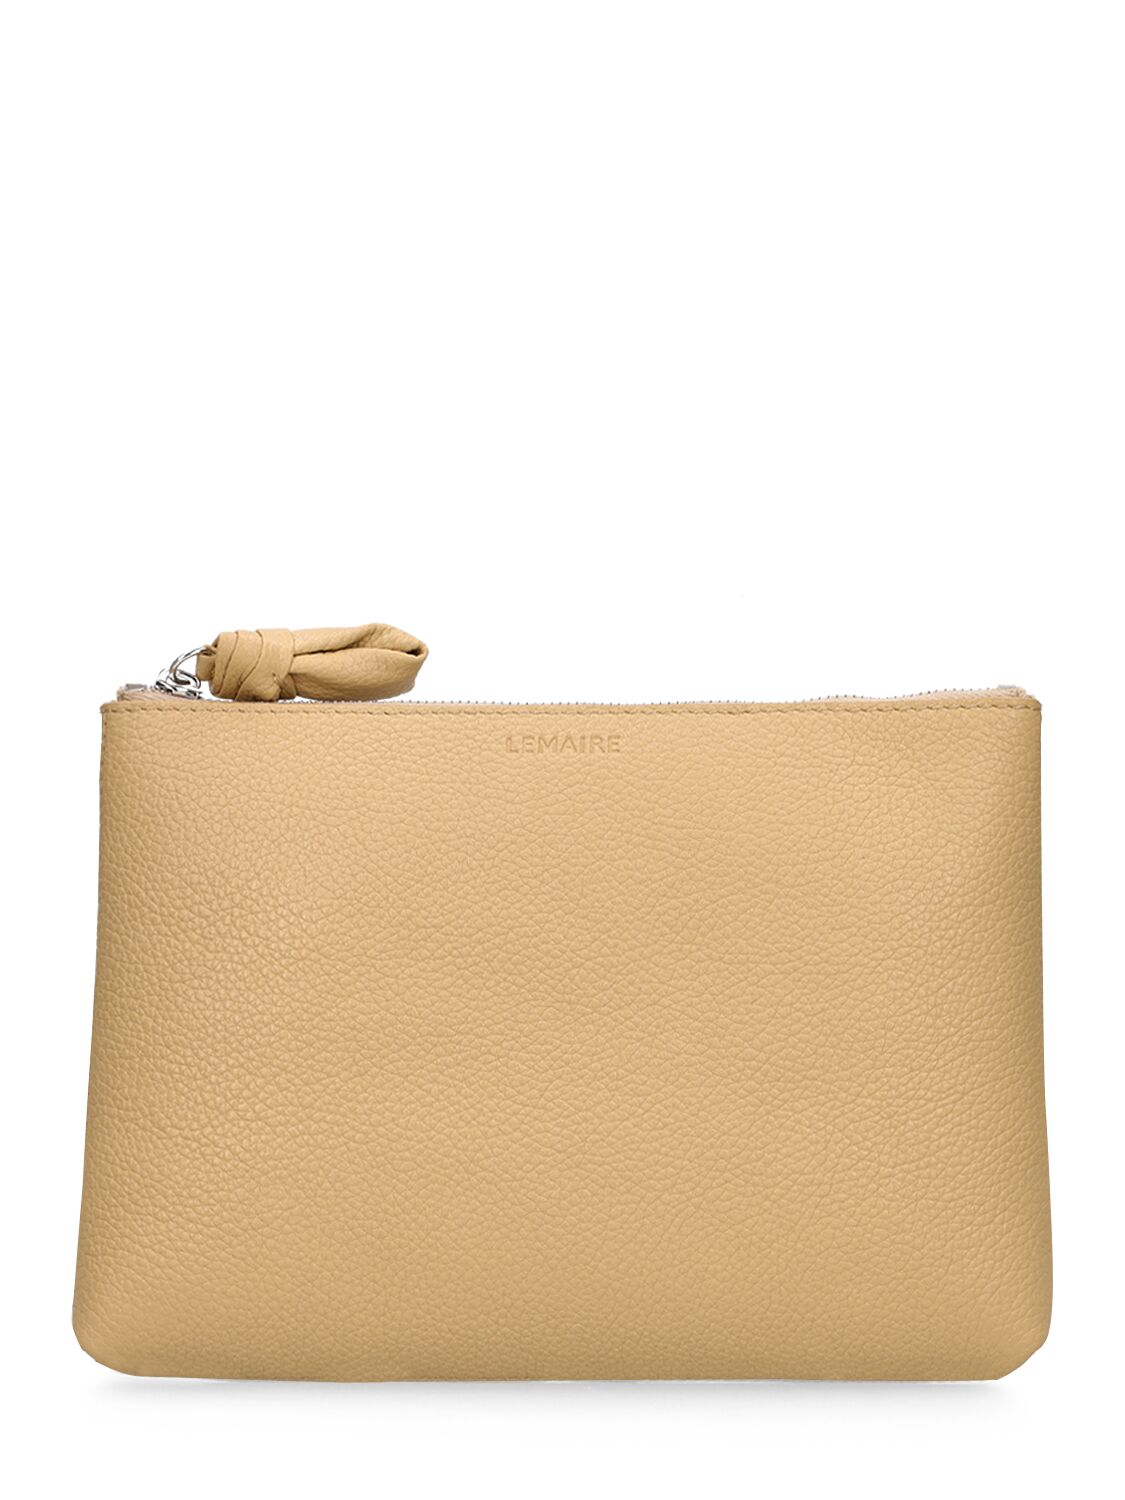 Lemaire Small Leather Pouch In Seashell Beige